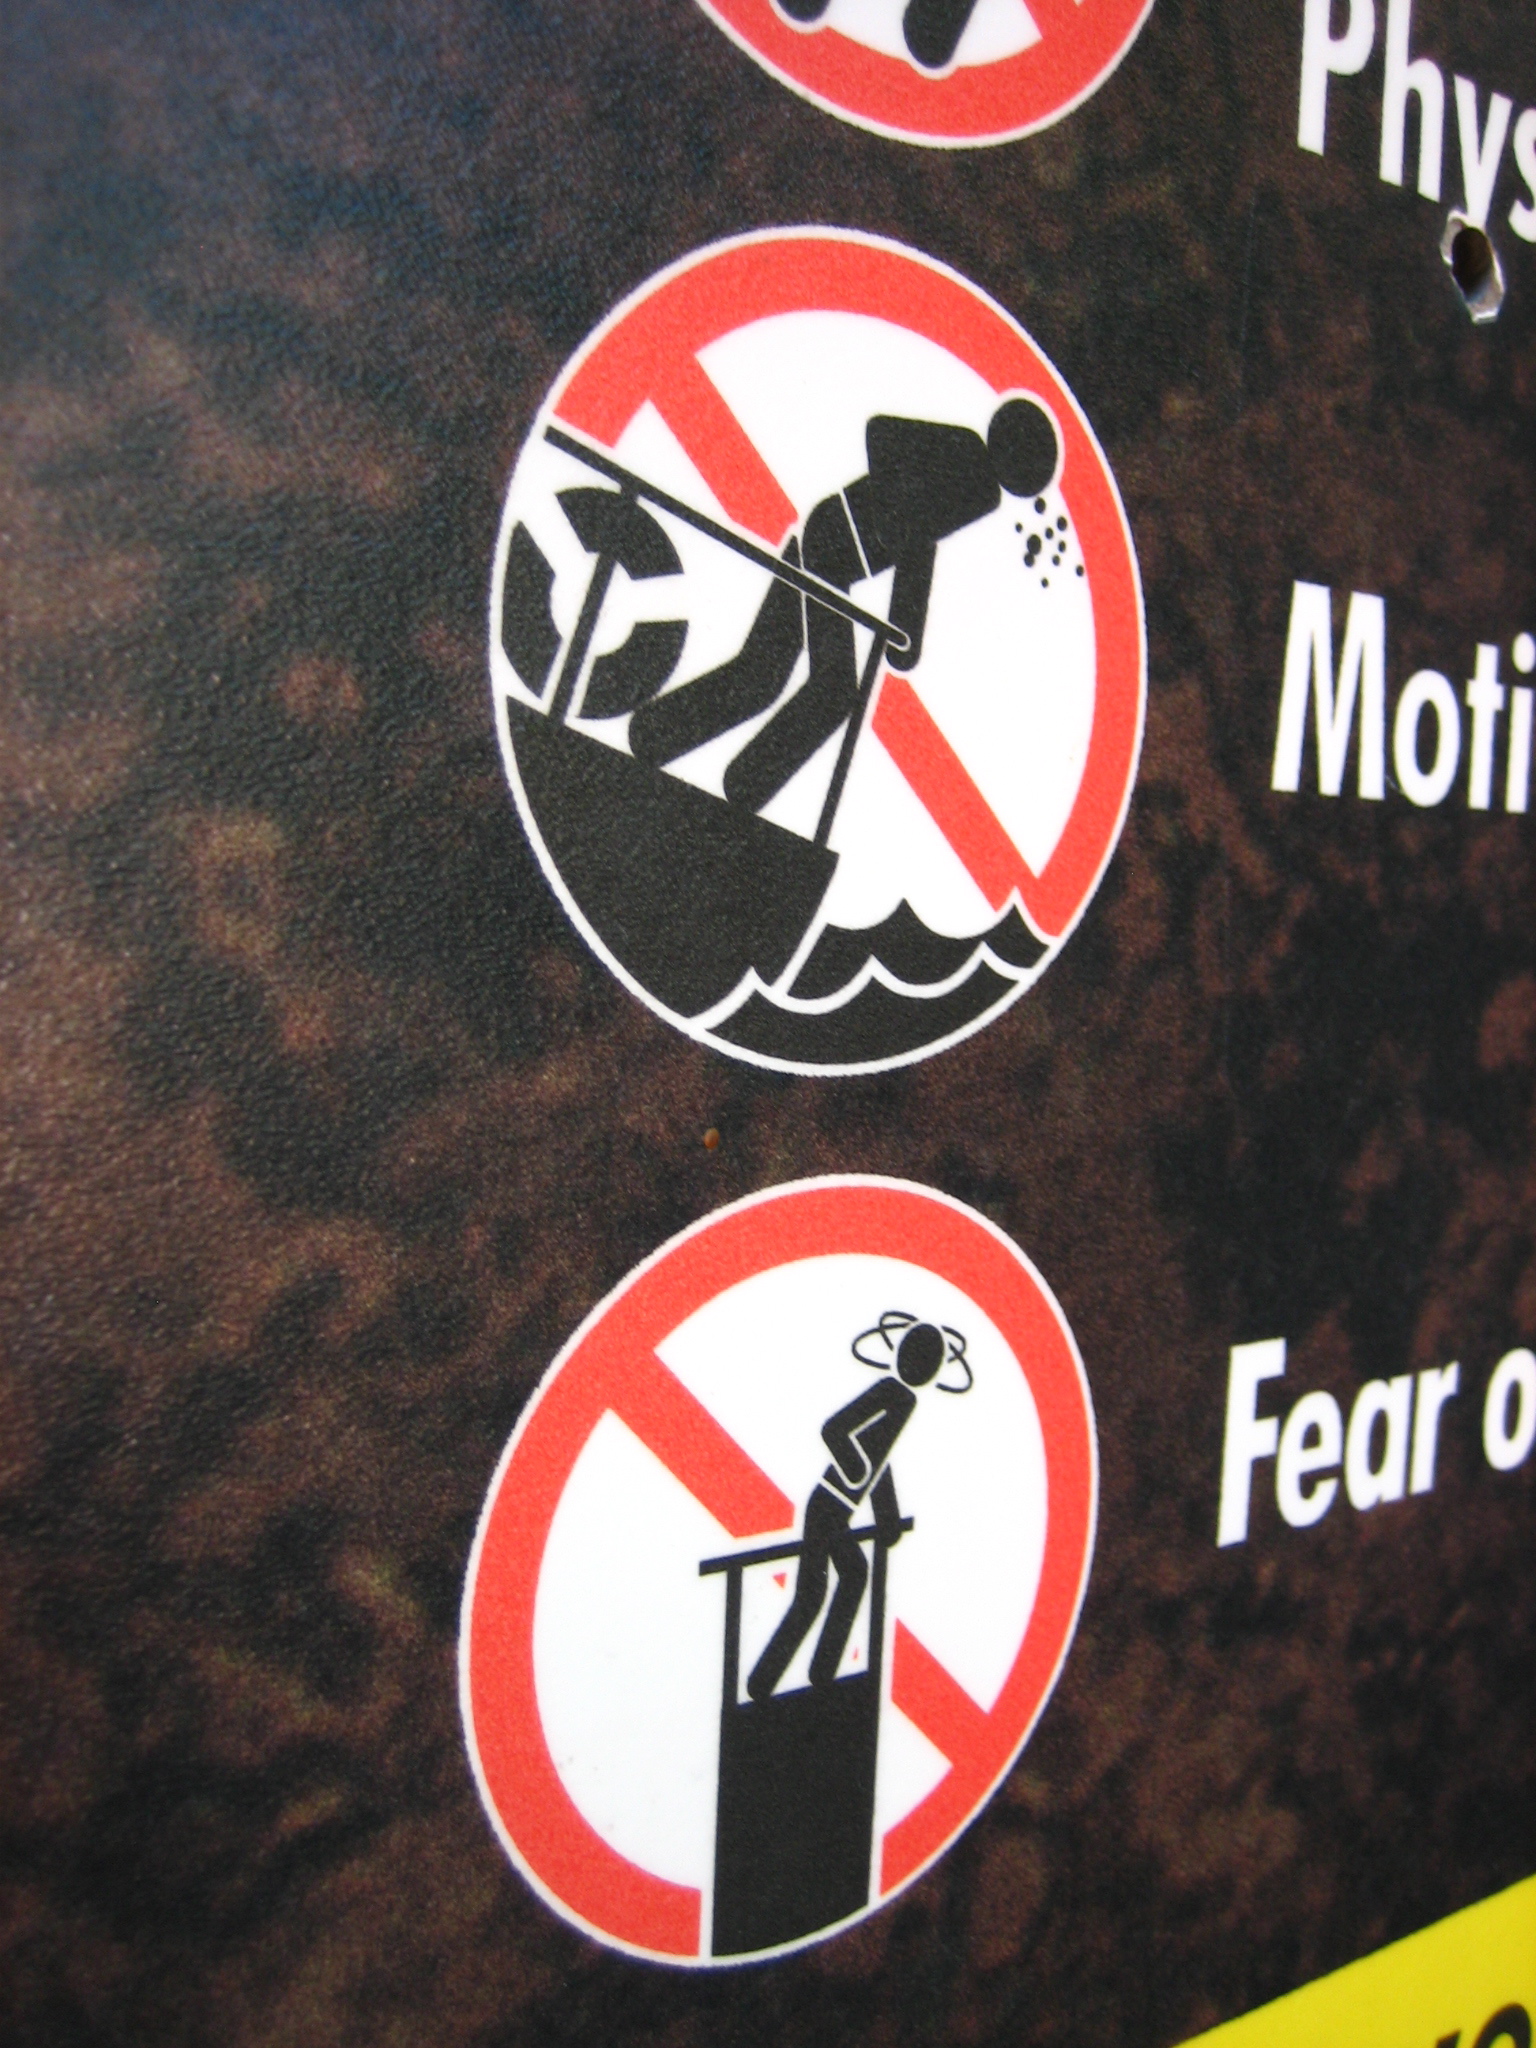 stickers showing two symbols depicting dangers of physical and non - physical devices